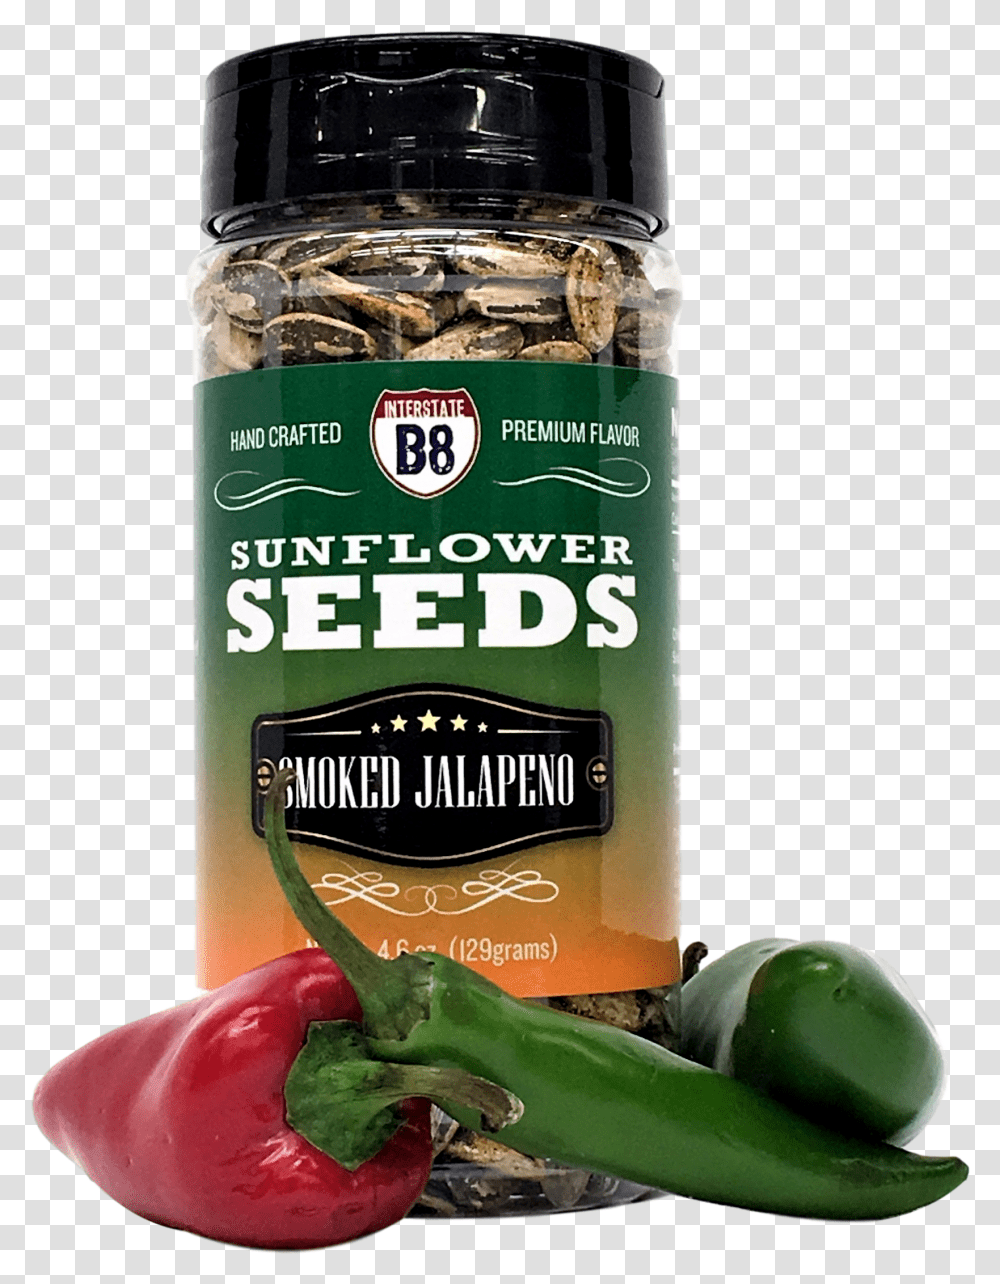 Smoked Jalapeno Sunflower Seeds Sunflower Seed, Plant, Vegetable, Food, Pepper Transparent Png